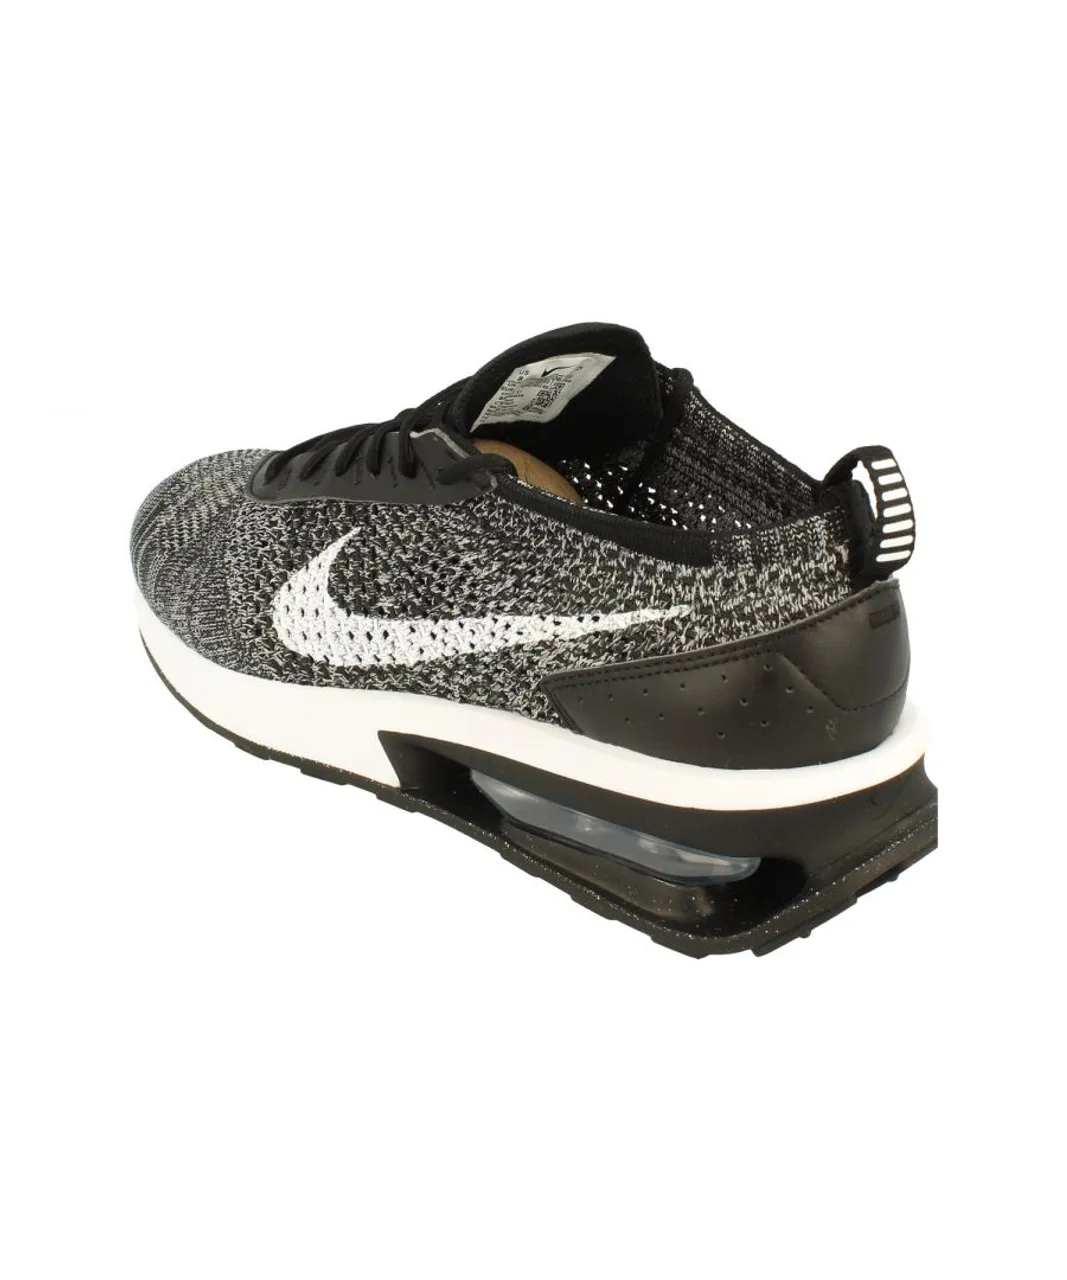 Nike Air Max Flyknit Racer Mens Black Trainers